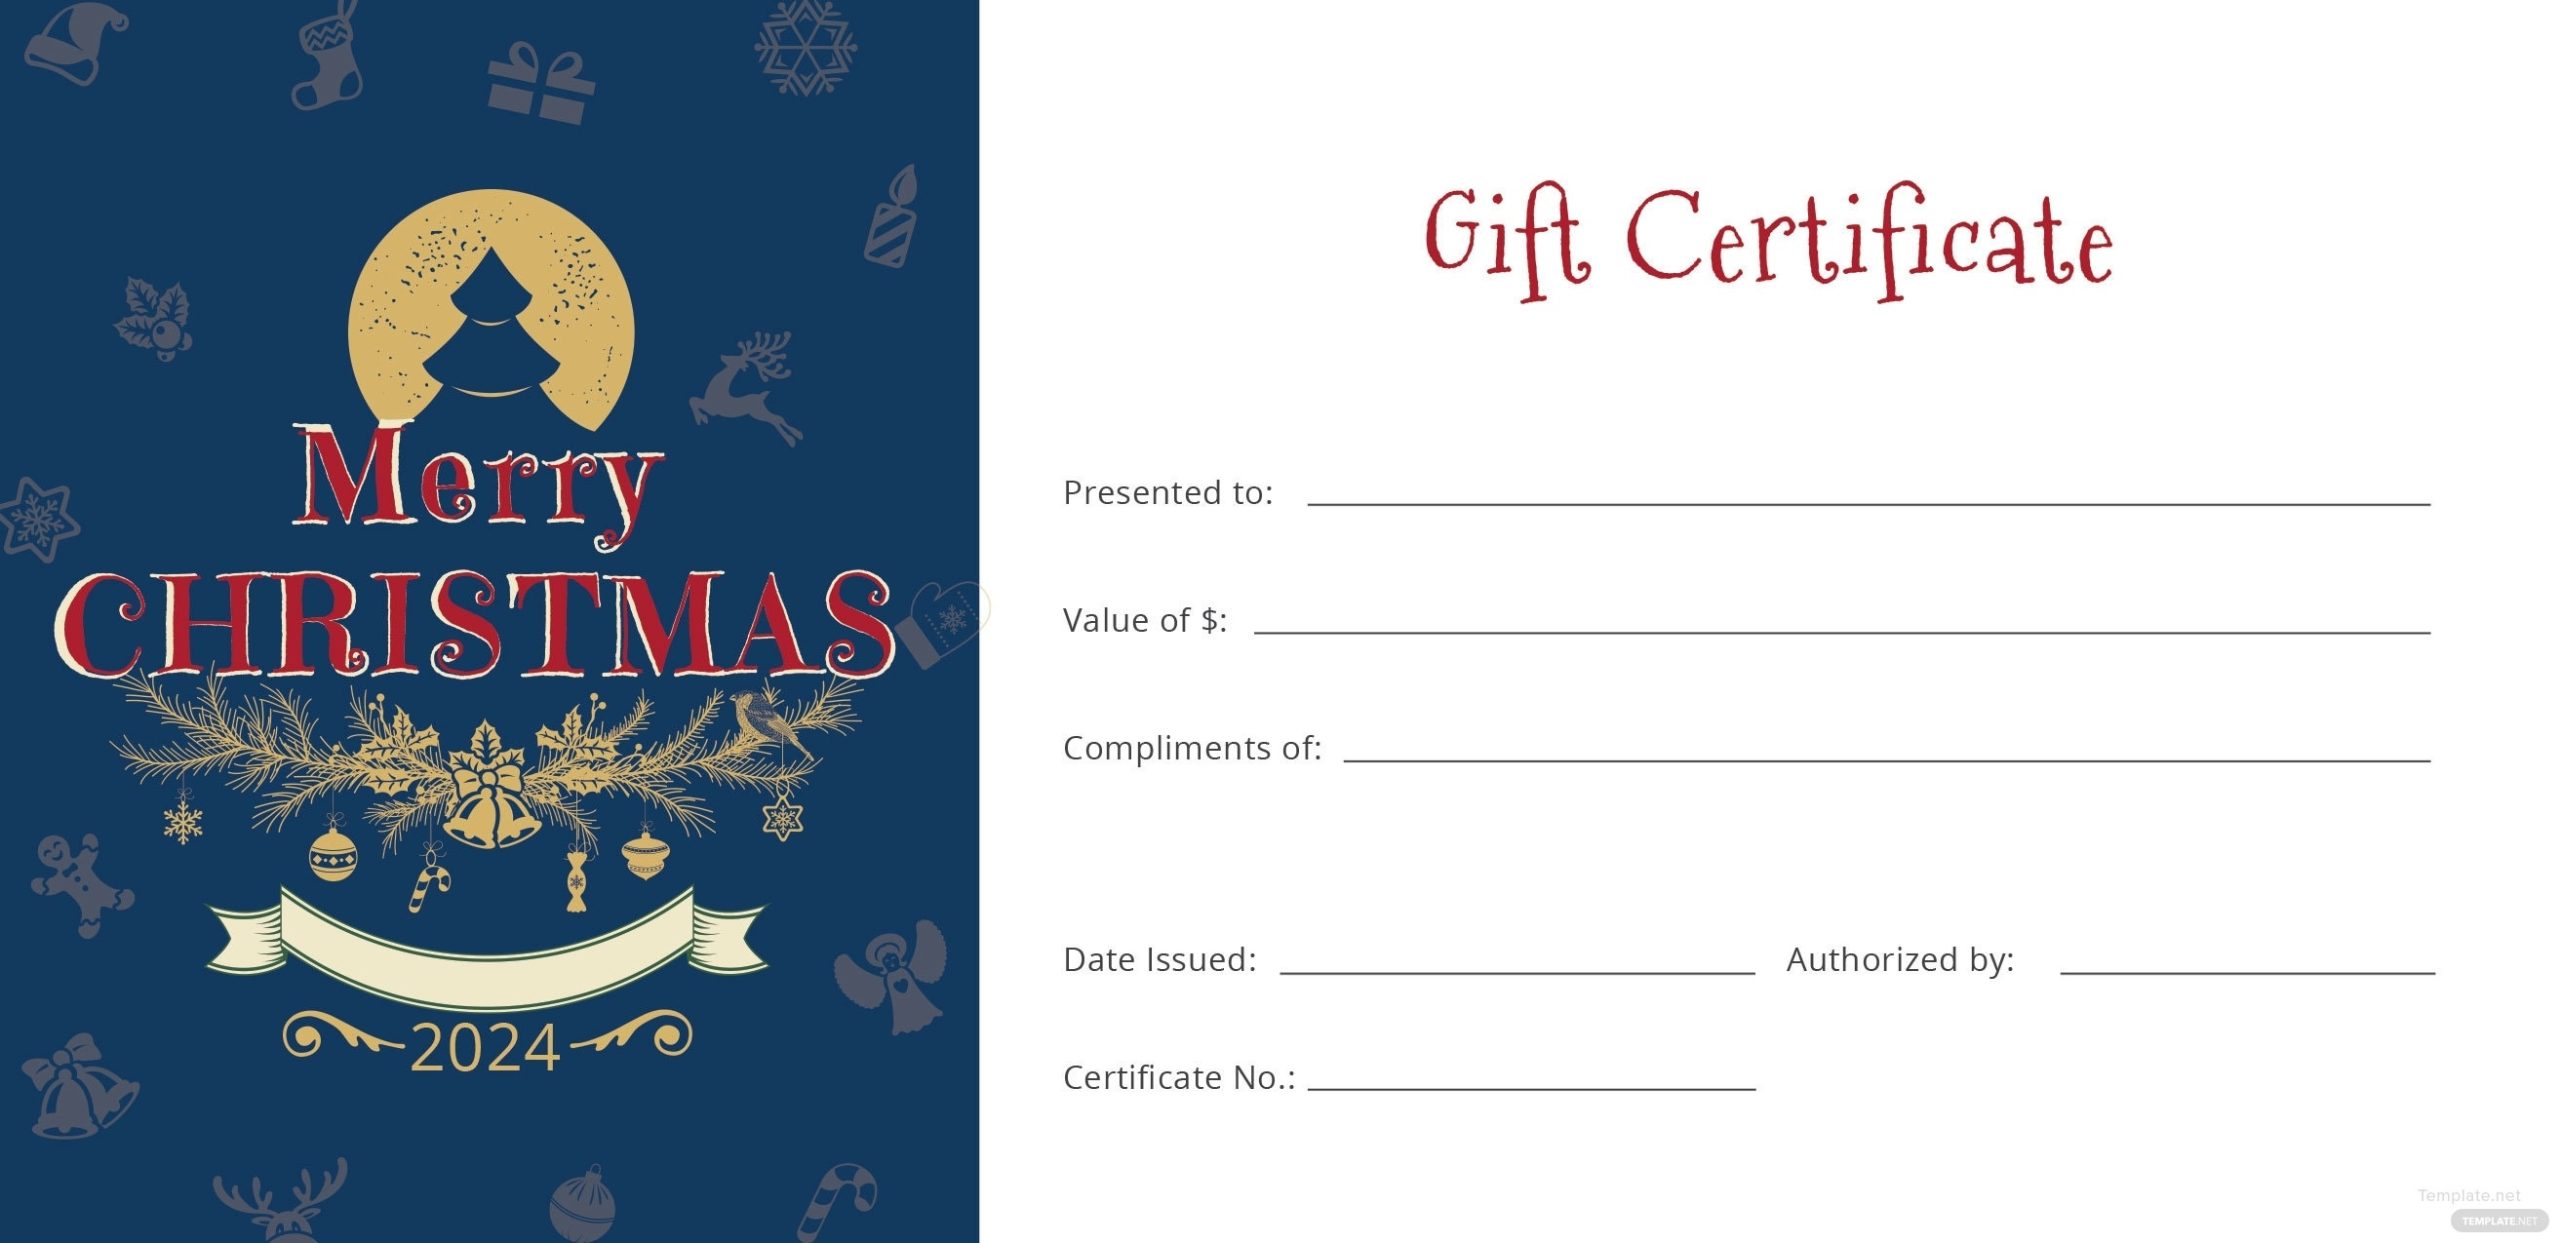 Free Christmas Gift Certificate Template In Adobe Illustrator Throughout Publisher Gift Certificate Template